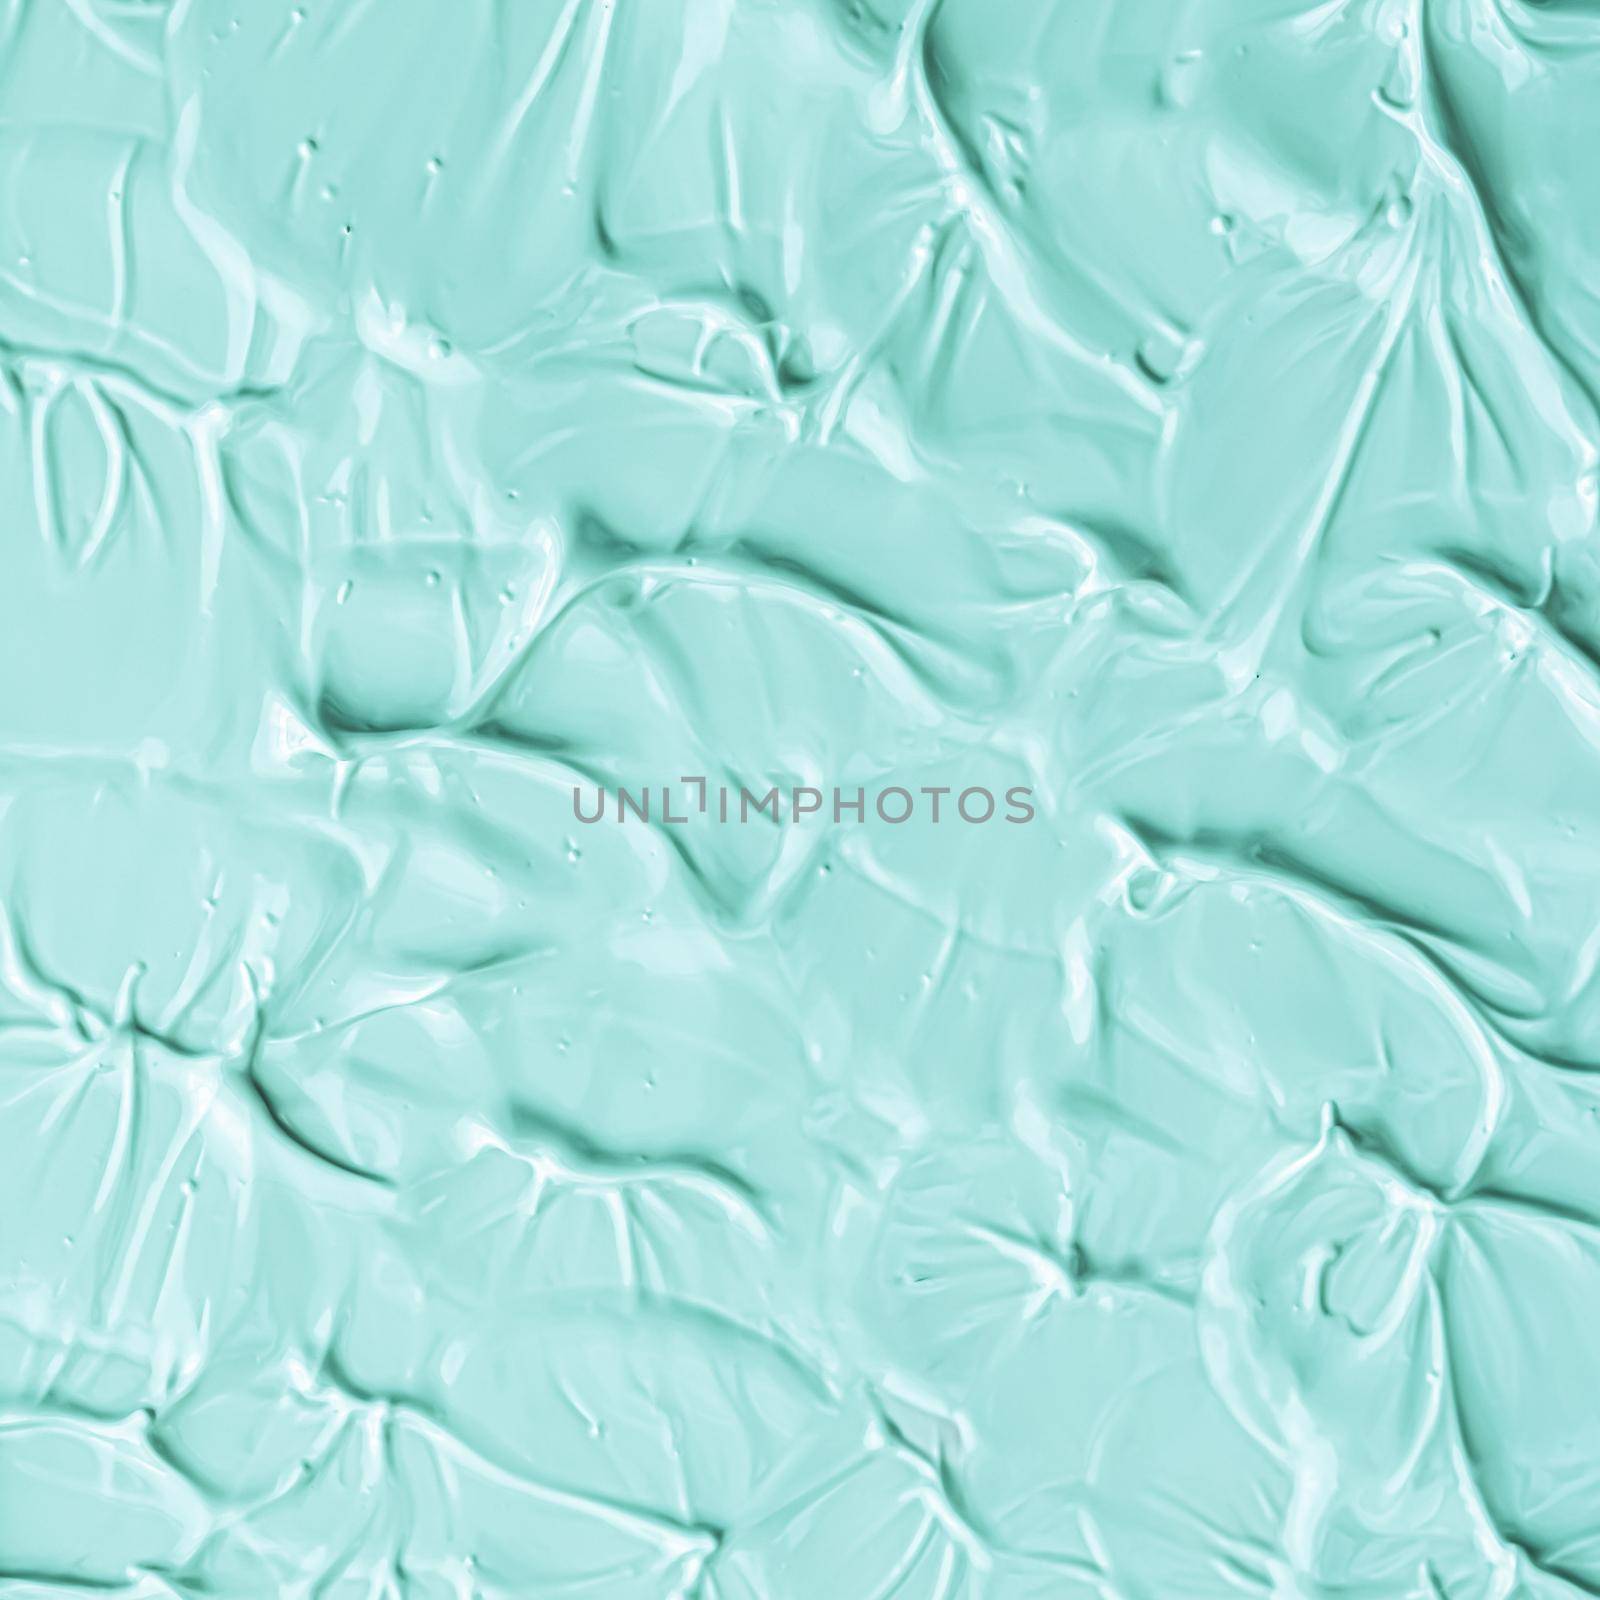 Mint cosmetic texture background, make-up and skincare cosmetics cream product, luxury beauty brand, holiday flatlay design or abstract wall art and paint strokes by Anneleven